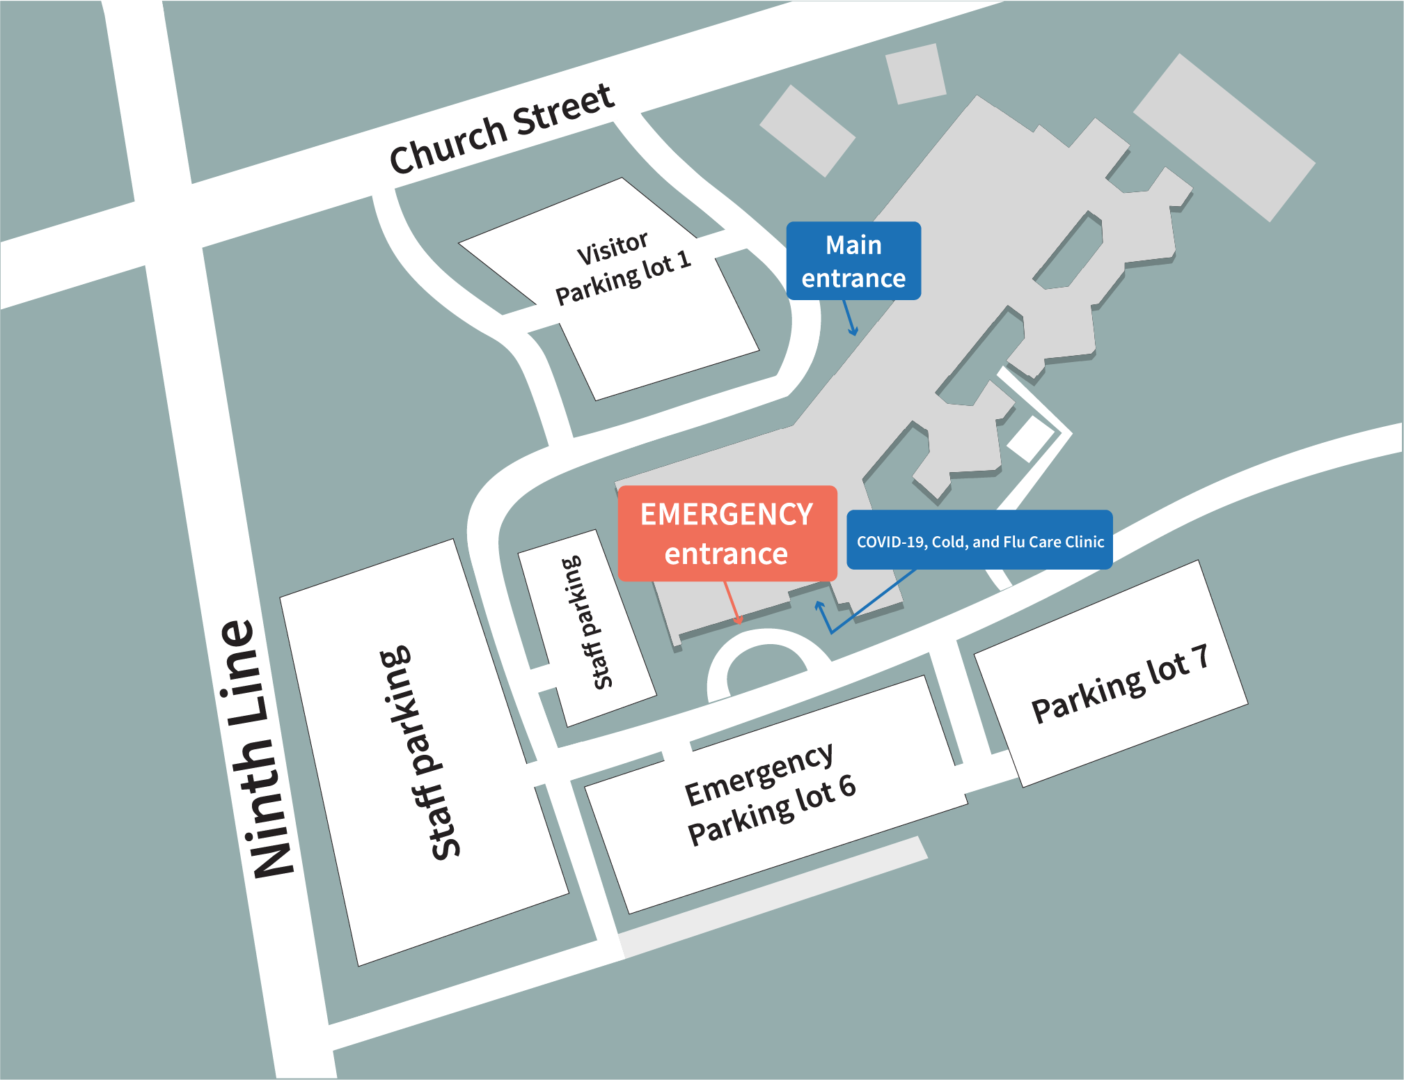 map shows Ninth Line and Church Street. Emergency entrance is next to Emergency Parking Lot 6. The Main Entrance is next to Visitor Parking Lot 1